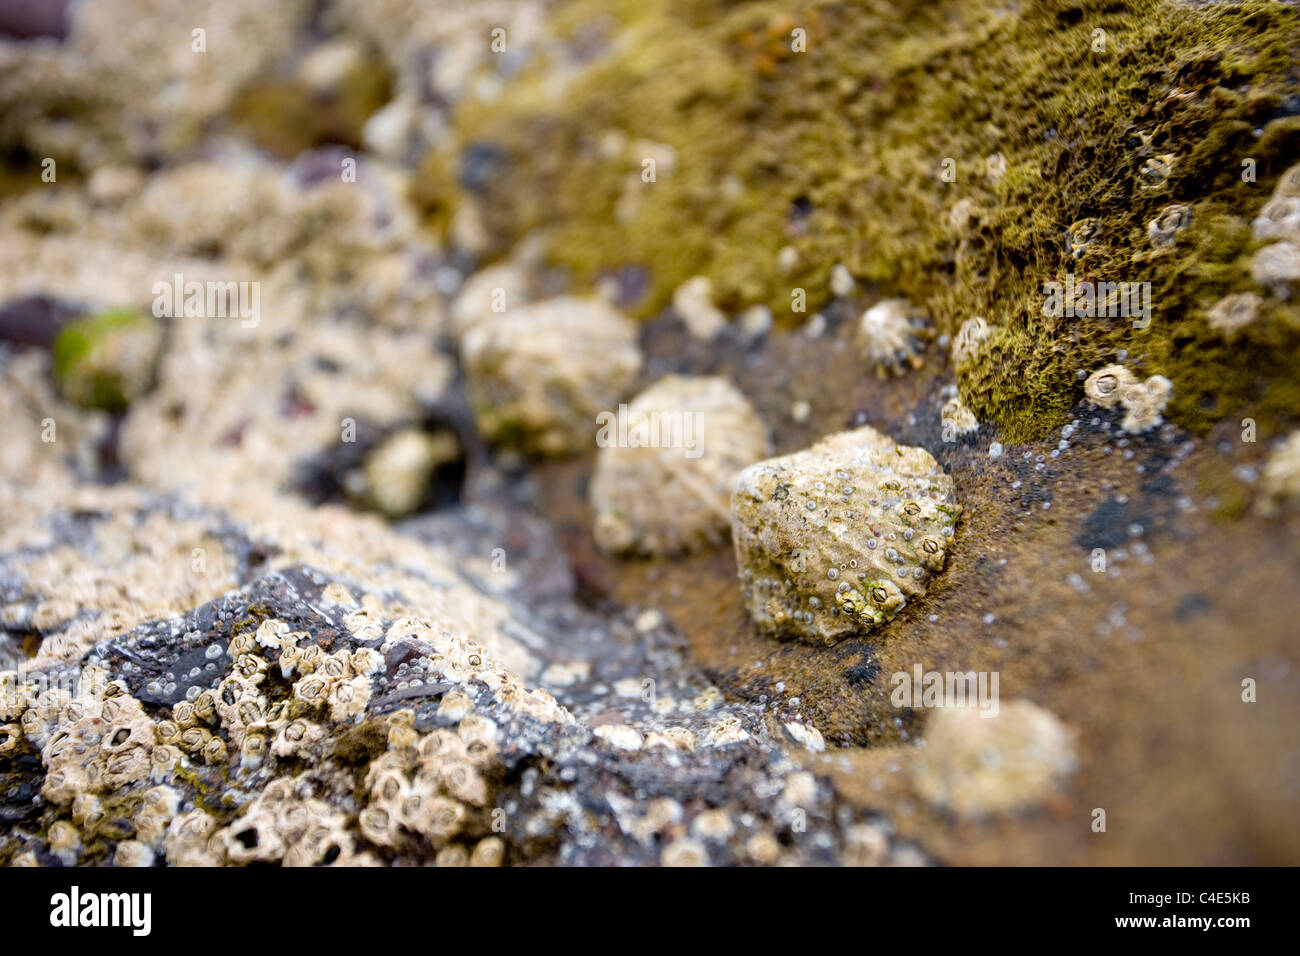 Barnacles and Limpets at Runswick Bay, East Coast Yorkshire, England Stock Photo